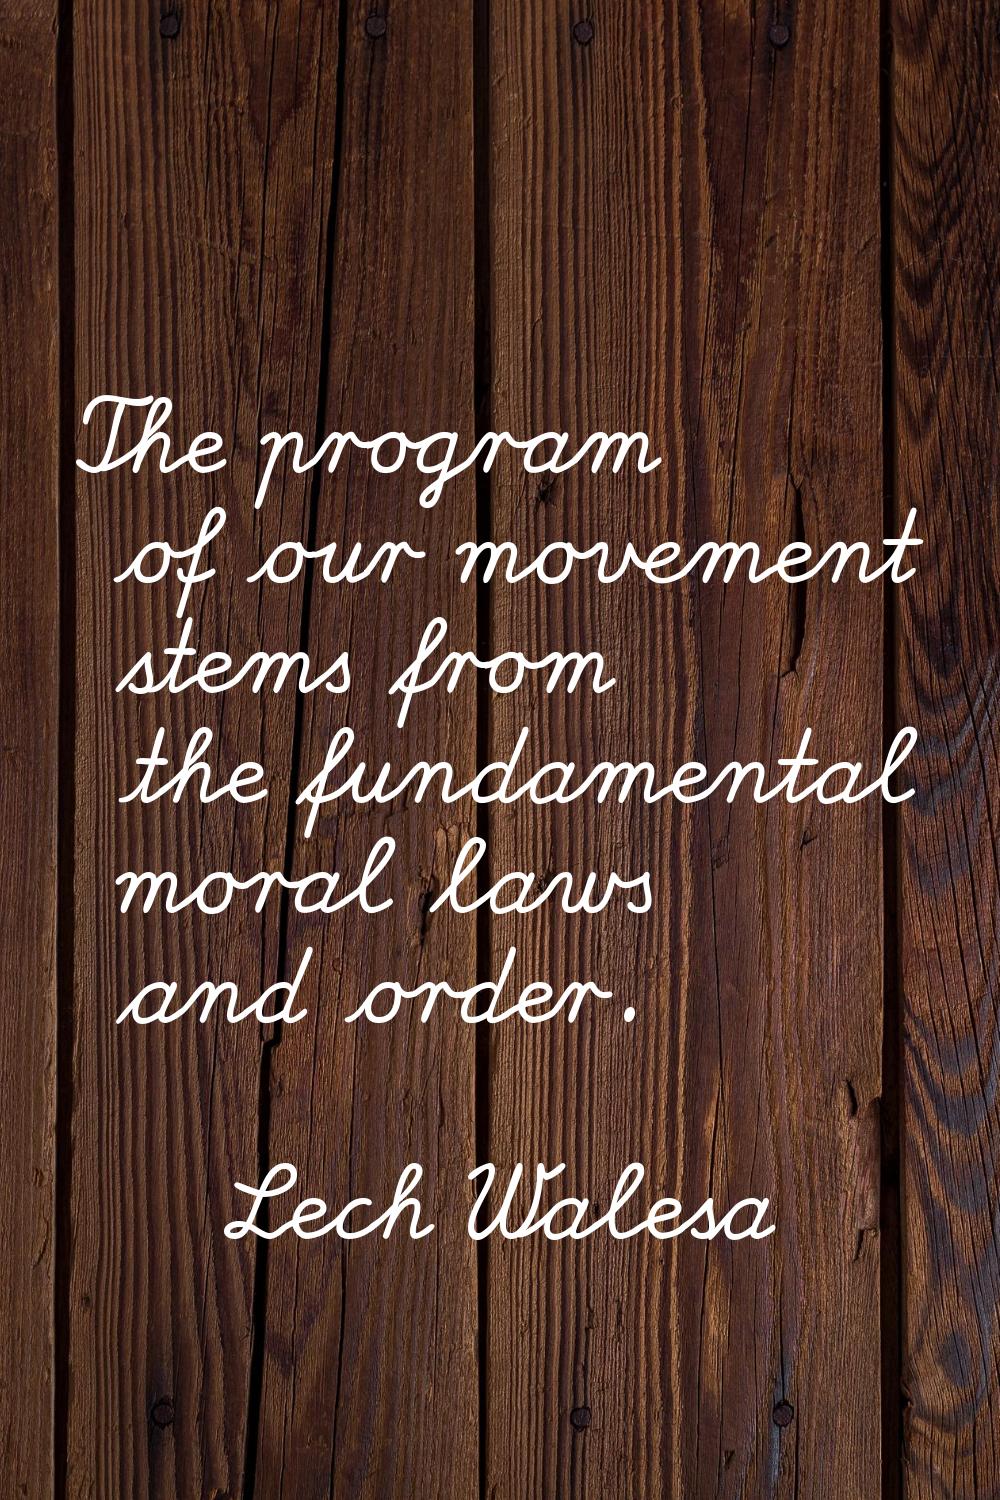 The program of our movement stems from the fundamental moral laws and order.